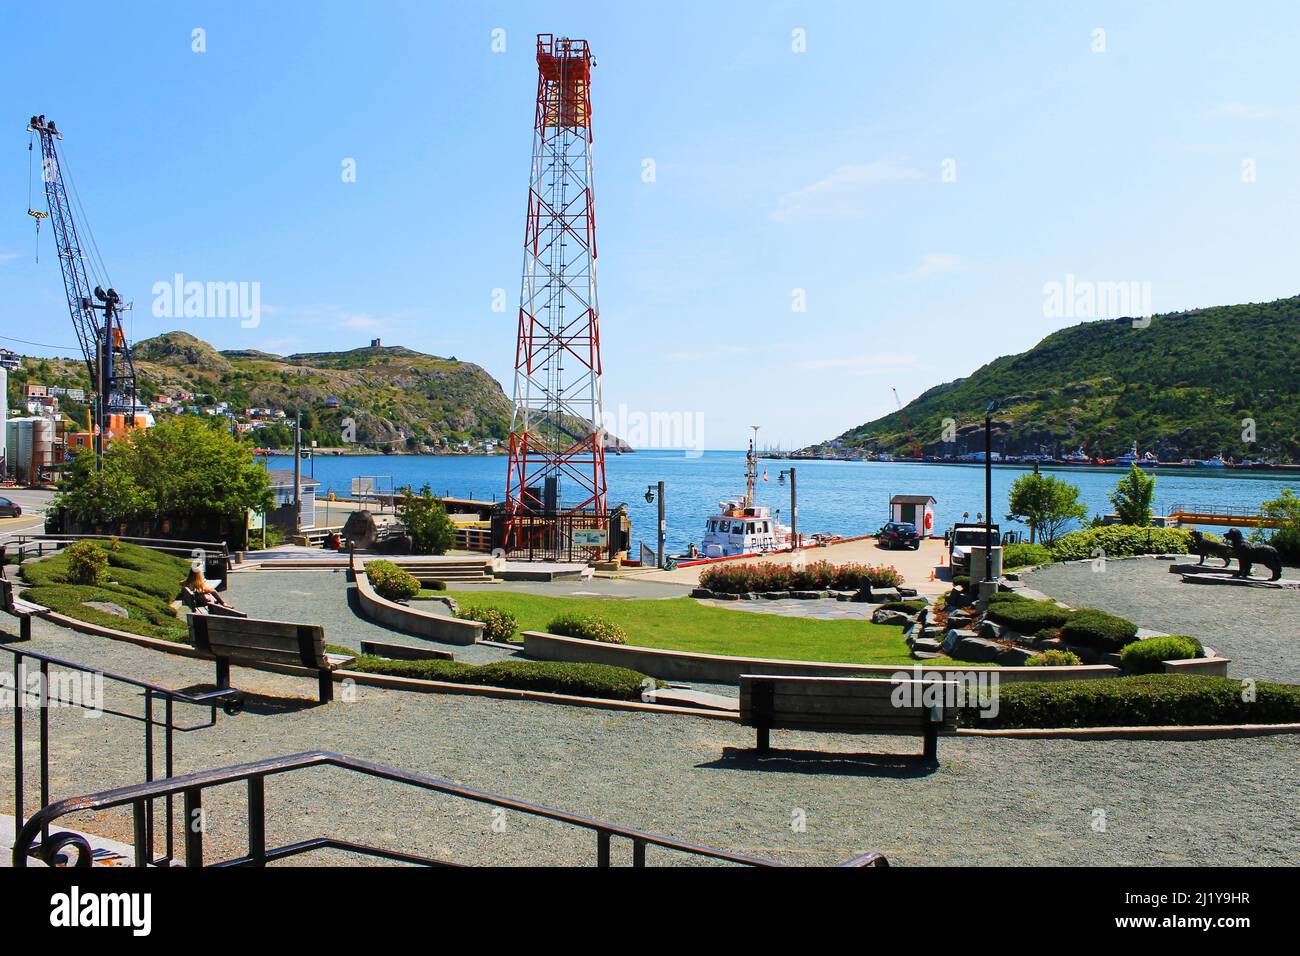 View looking out over Harbourside Park and St. John's Harbour Stock Photo